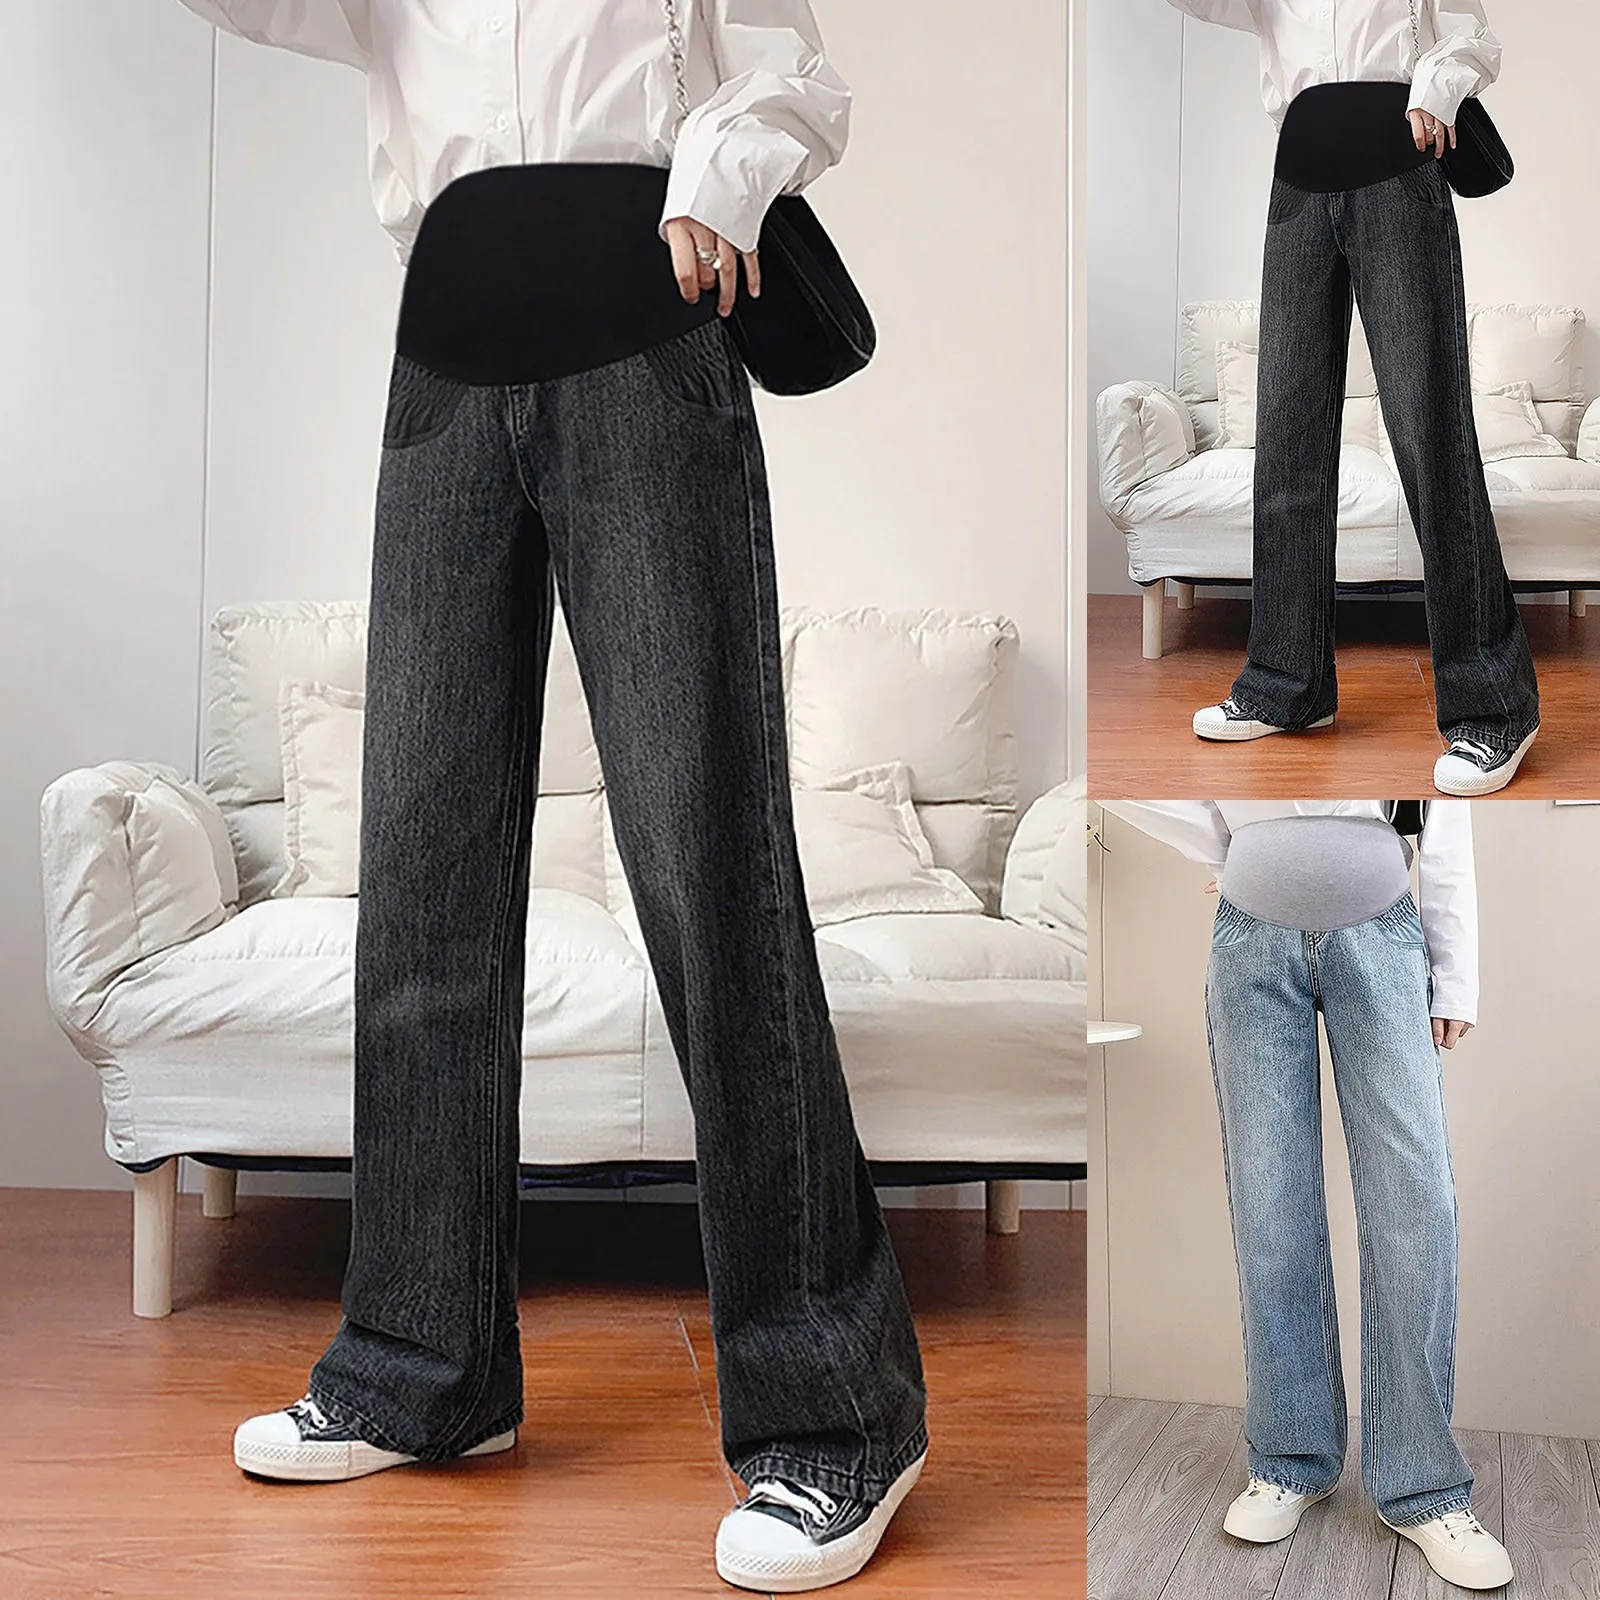 

Women's Fashionable Elastic High Waisted Bellies Jeans For Pregnant Comfortable Leggings Pants Trousers Exercise Leggings